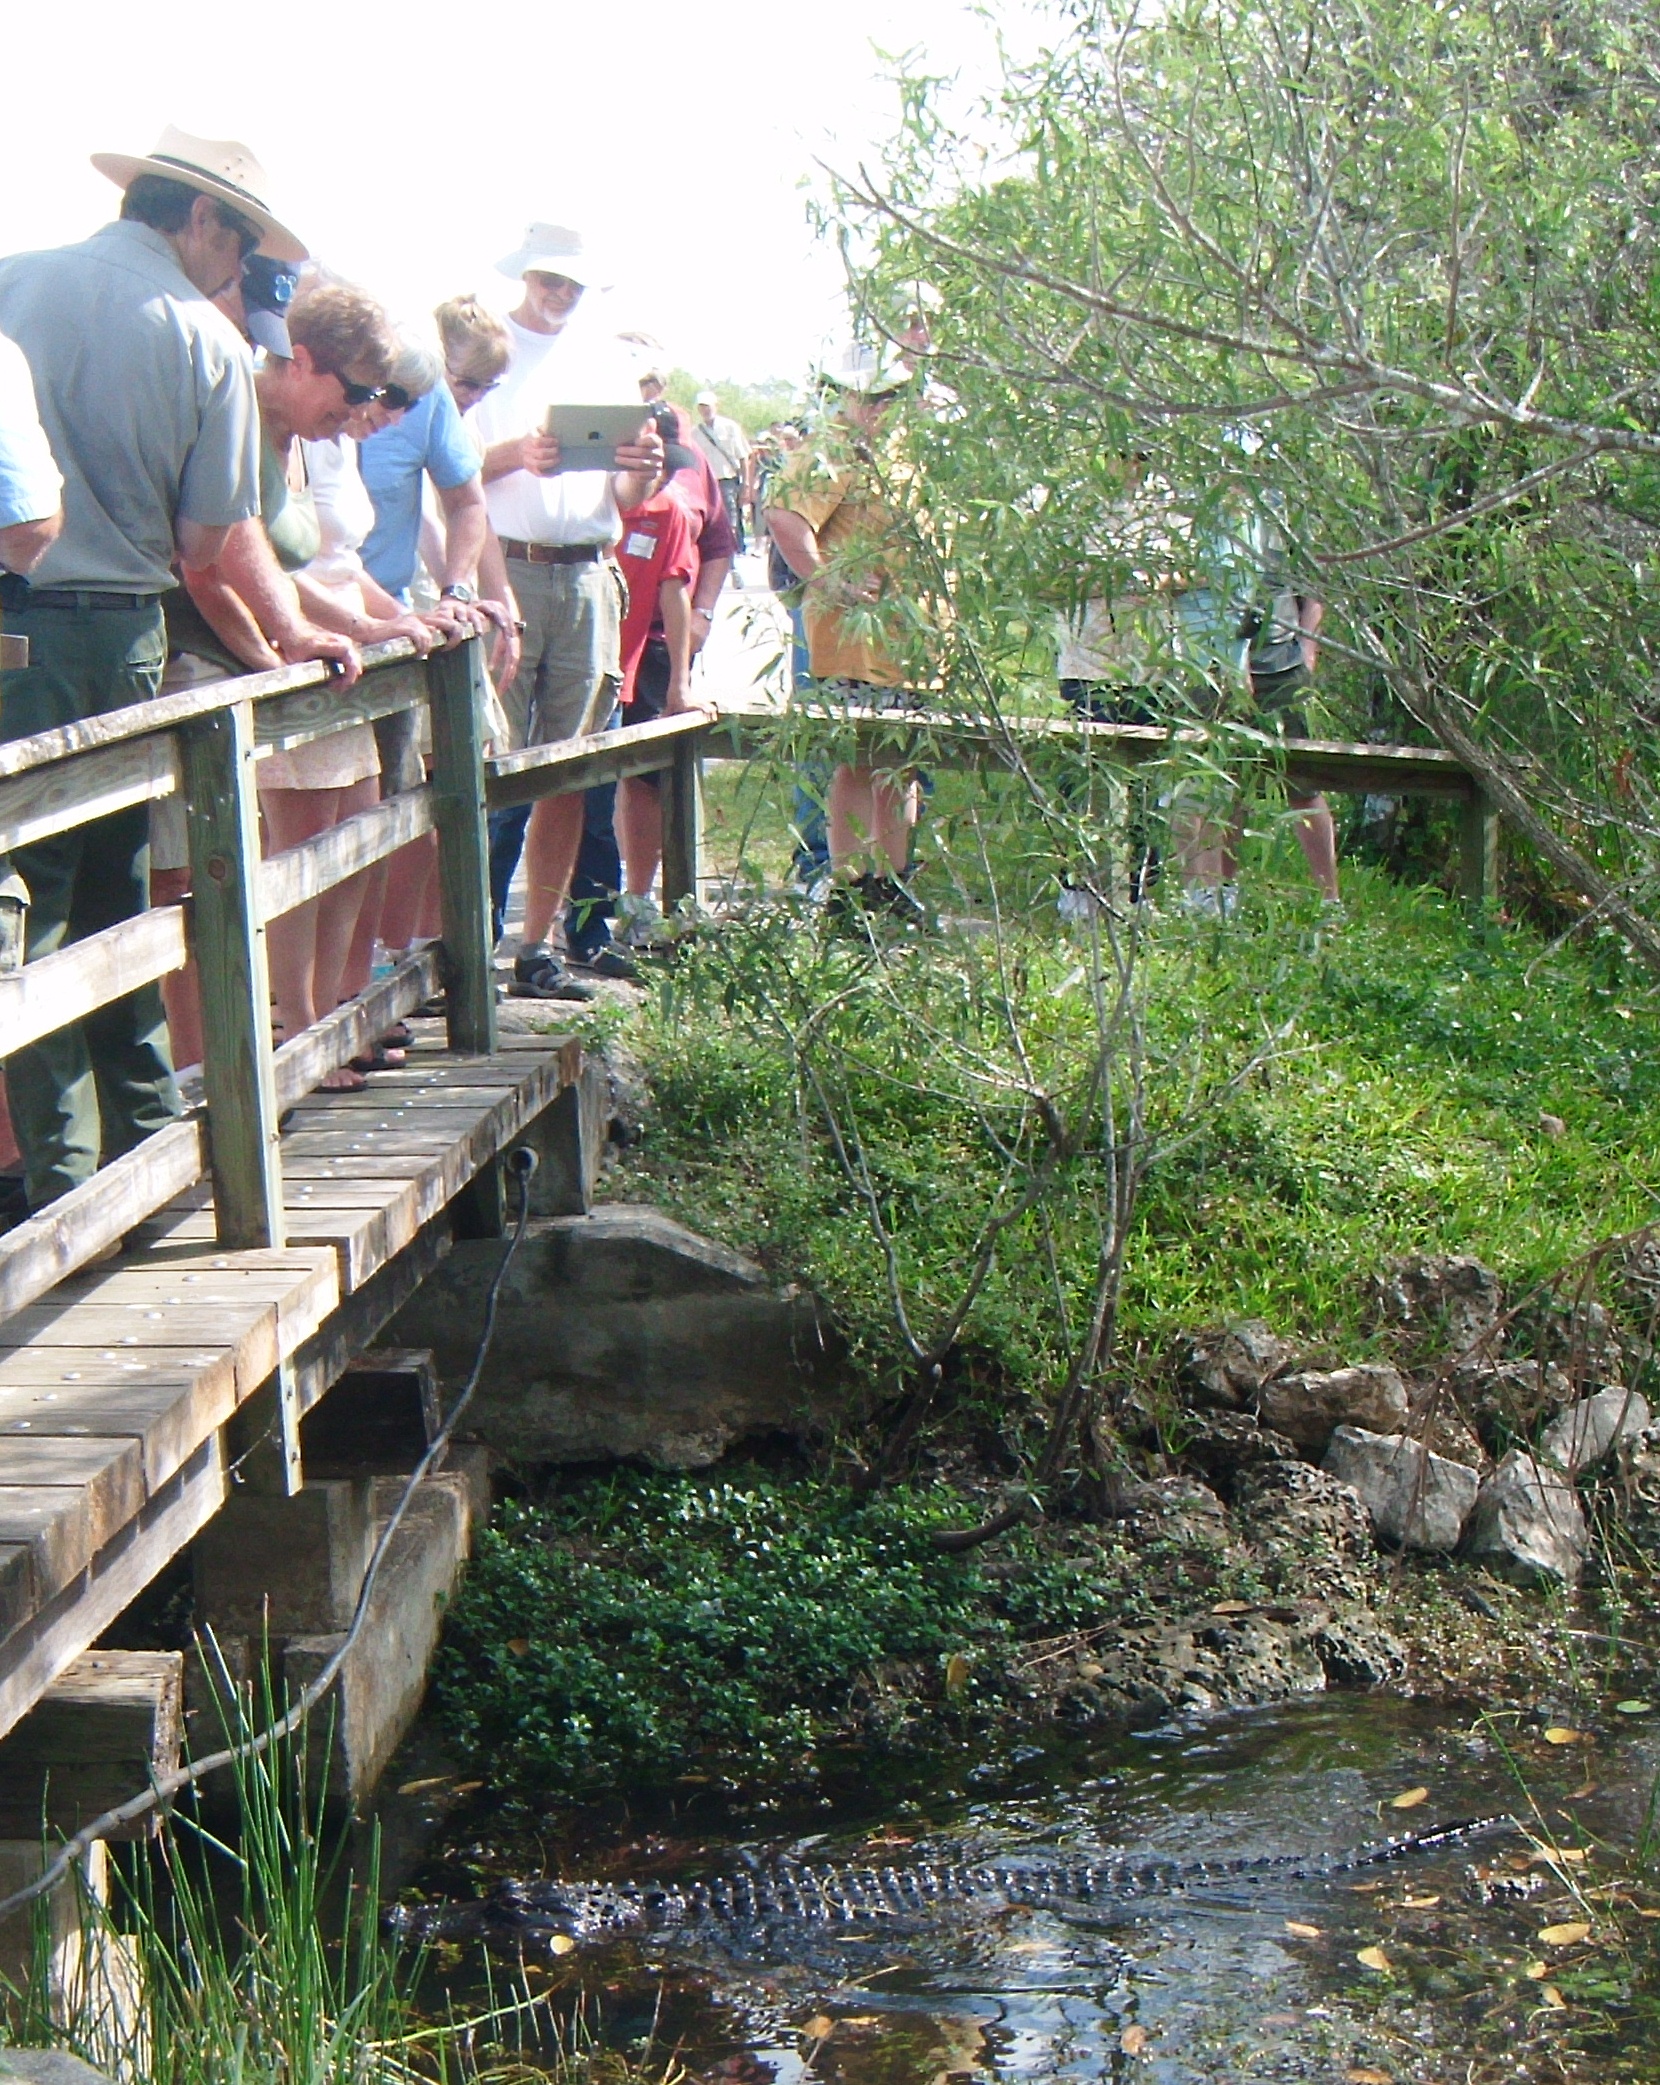 Visitors watch wildlife at the Everglades